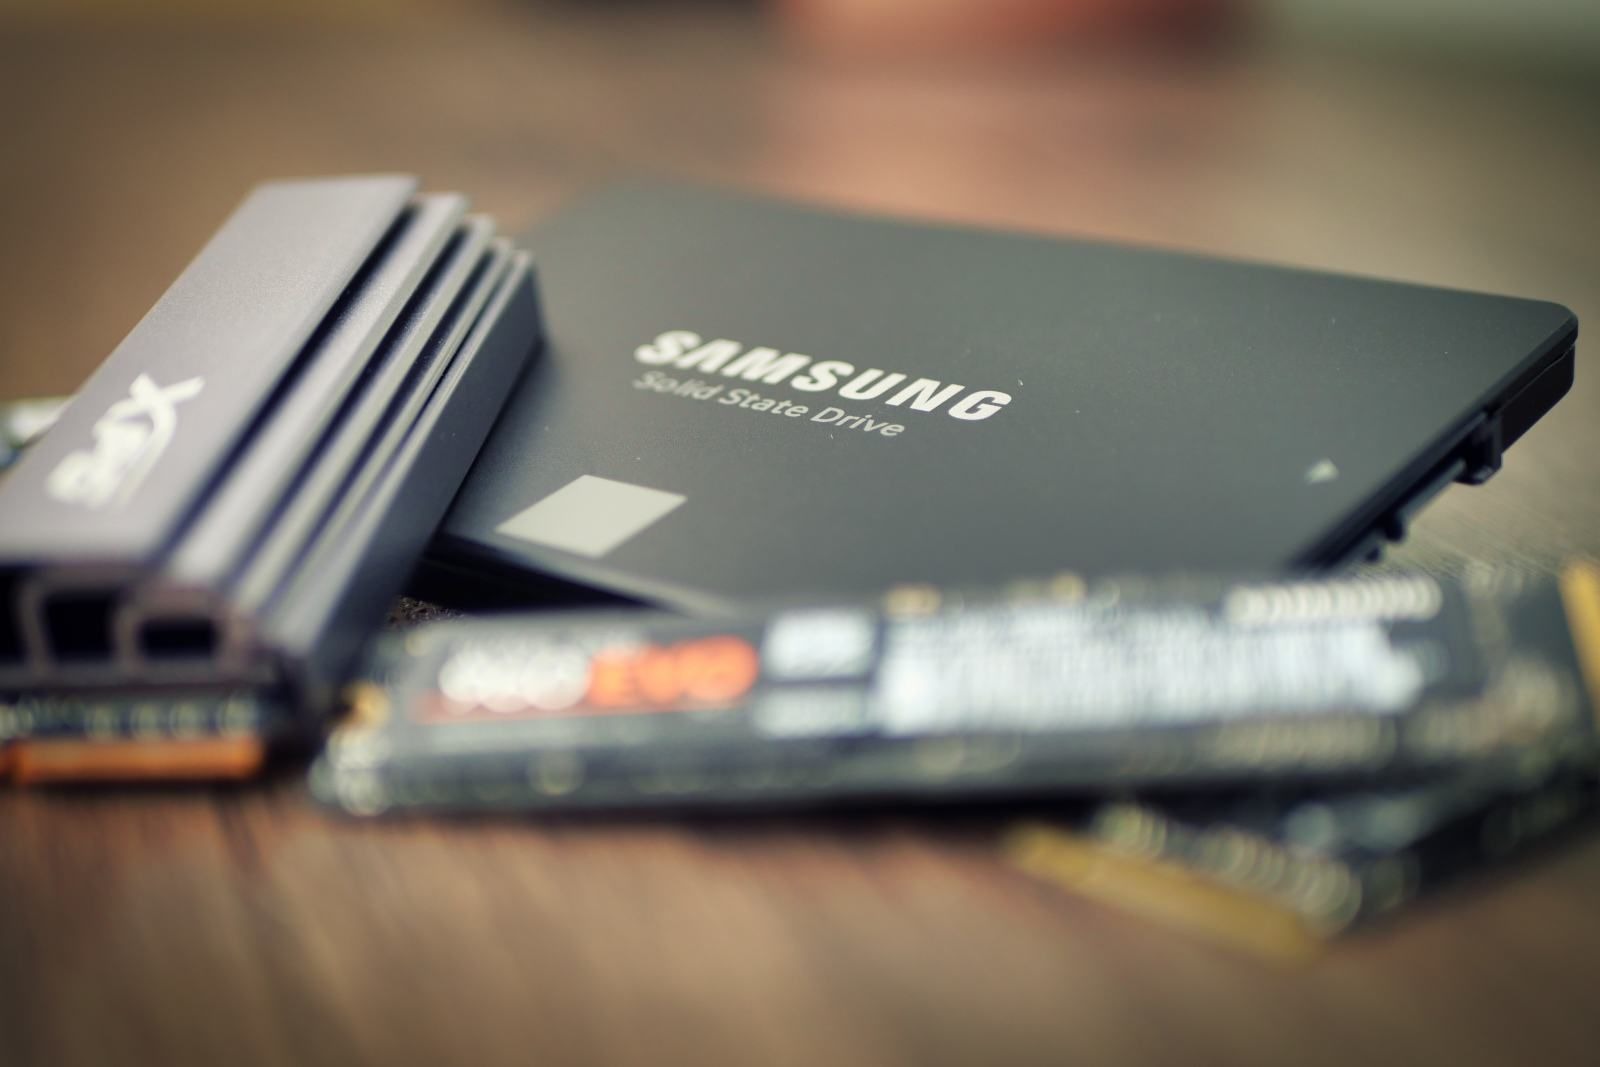 SSD drives can become very slow in Windows 11 if you're not paying attention